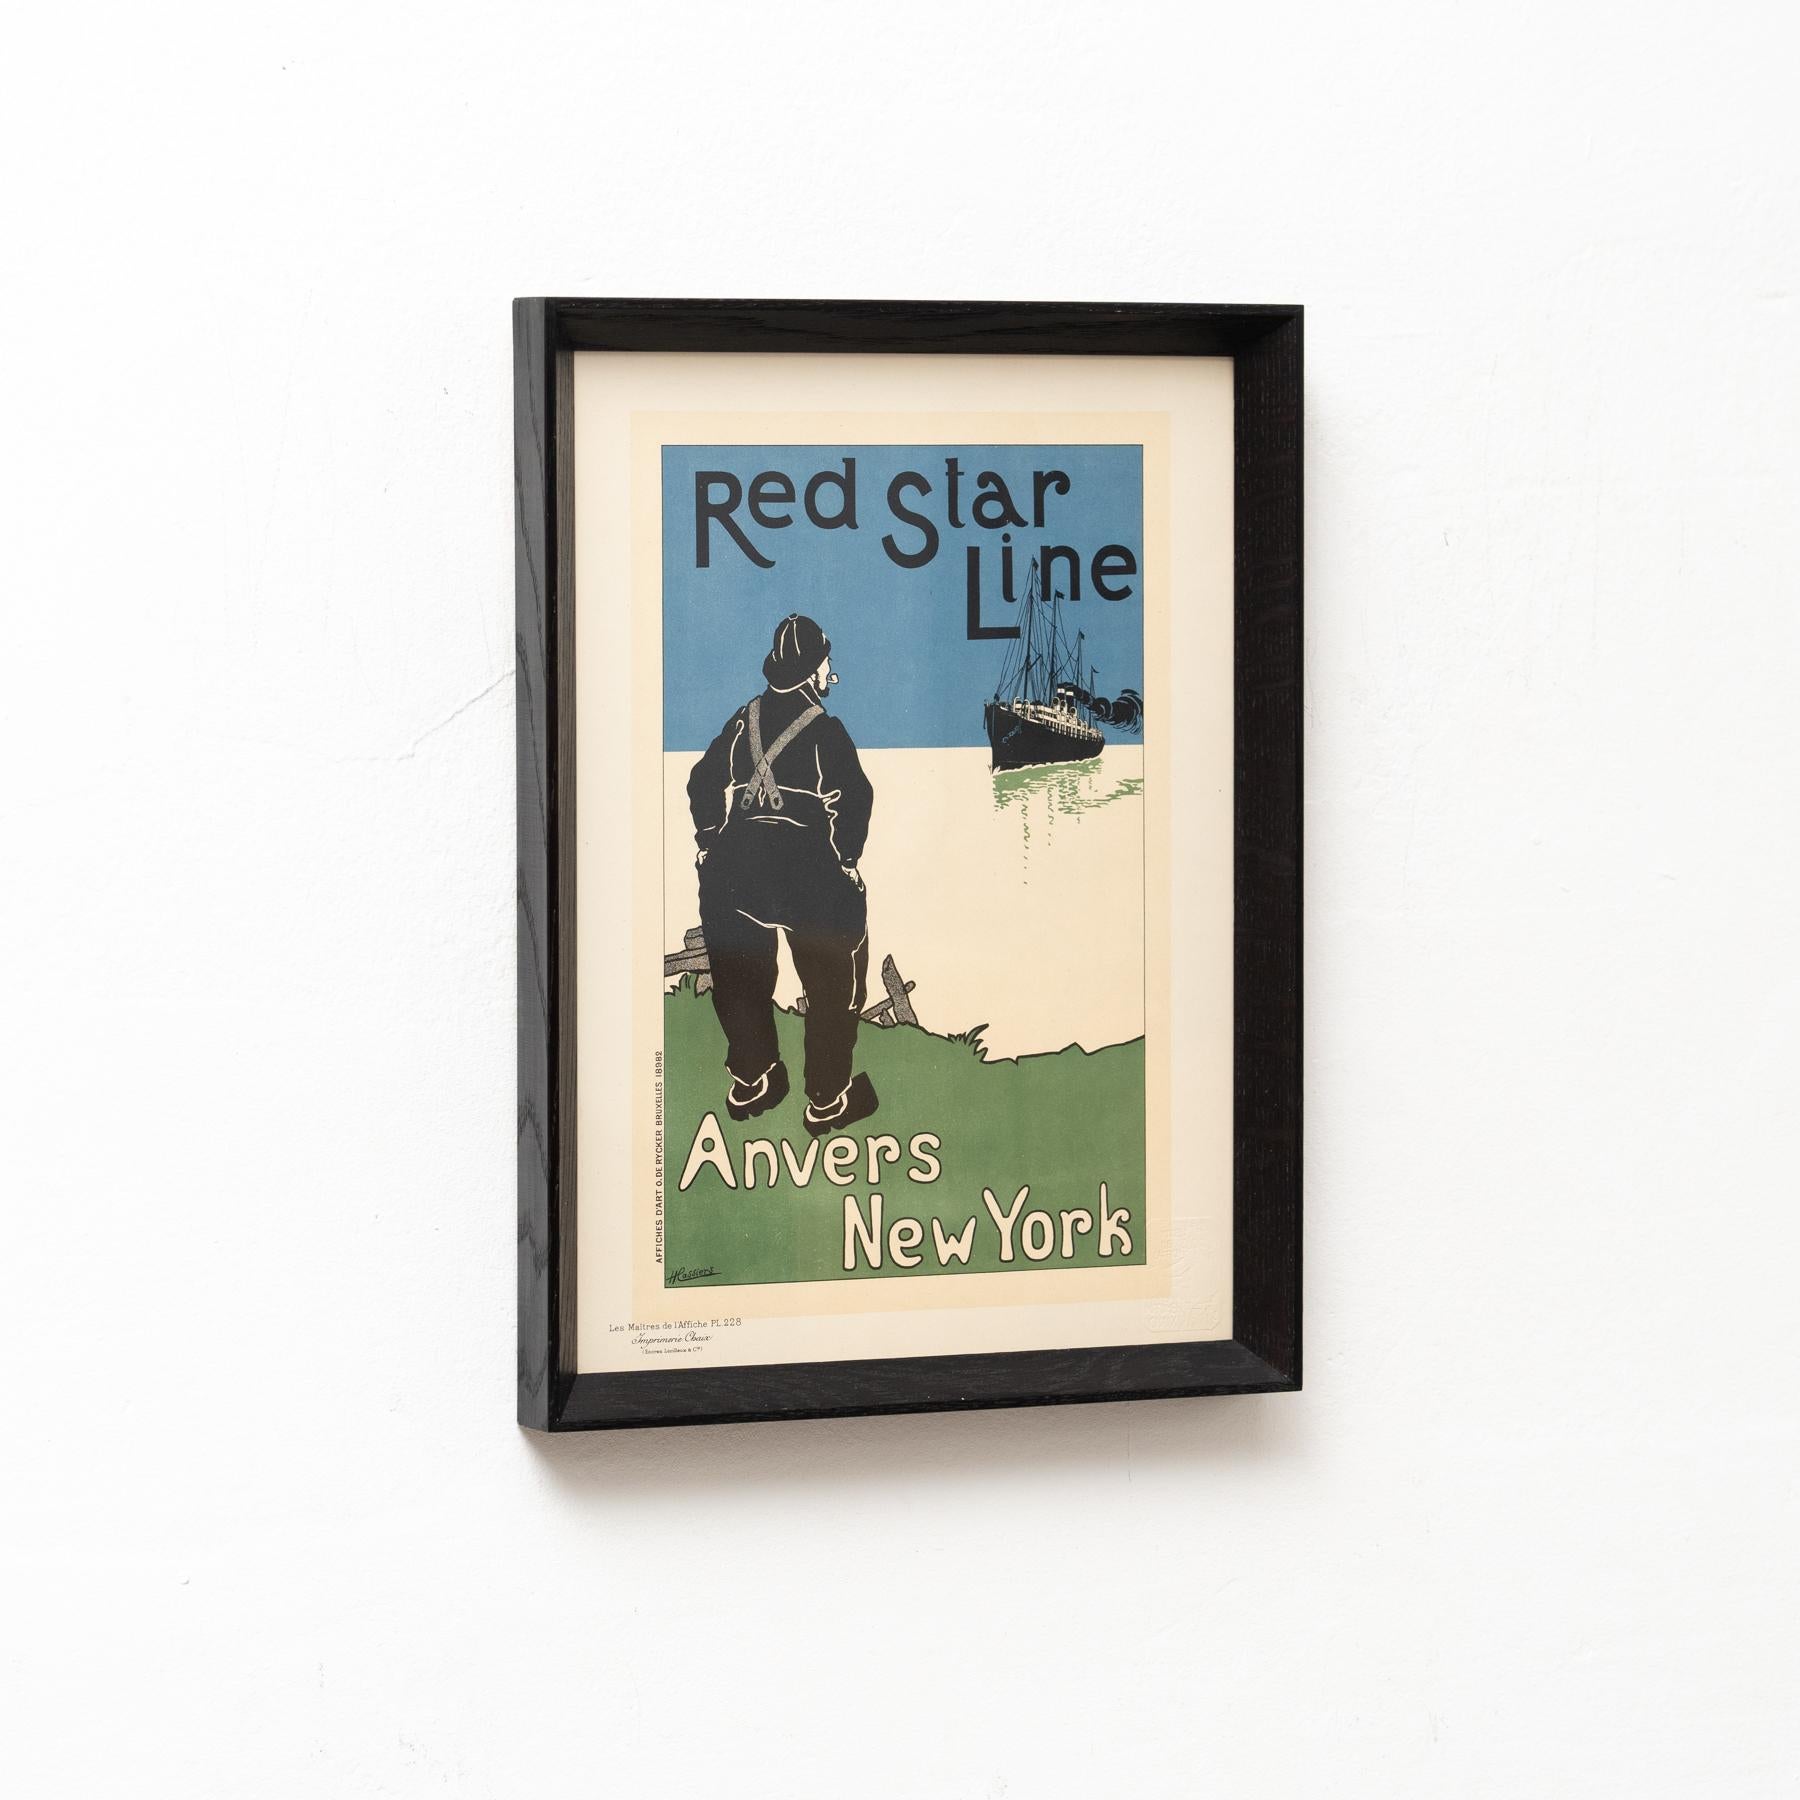 French Red Star Line Artwork by H. Cassiers by Les Maitres de l'Affiche, circa 1930 For Sale